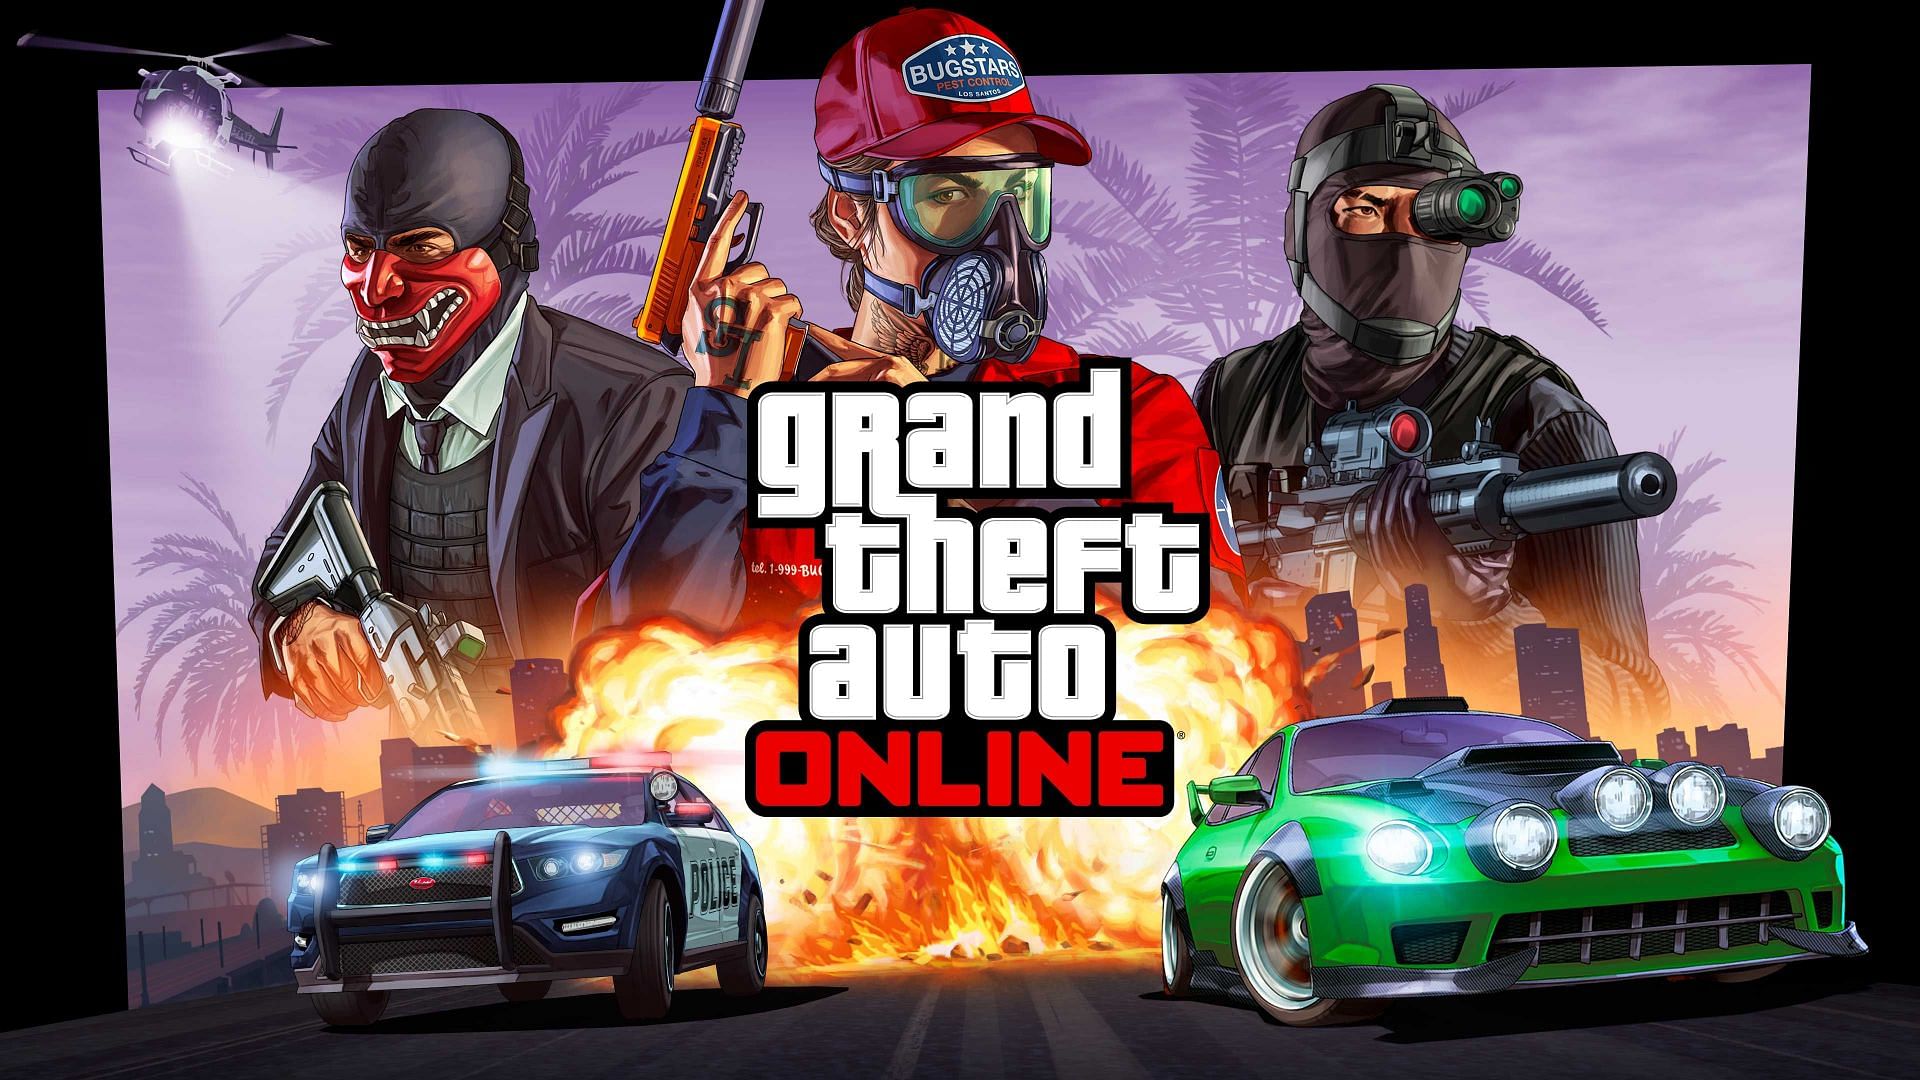 GTA 5 & GTA Online will be free for some players: Check if you're